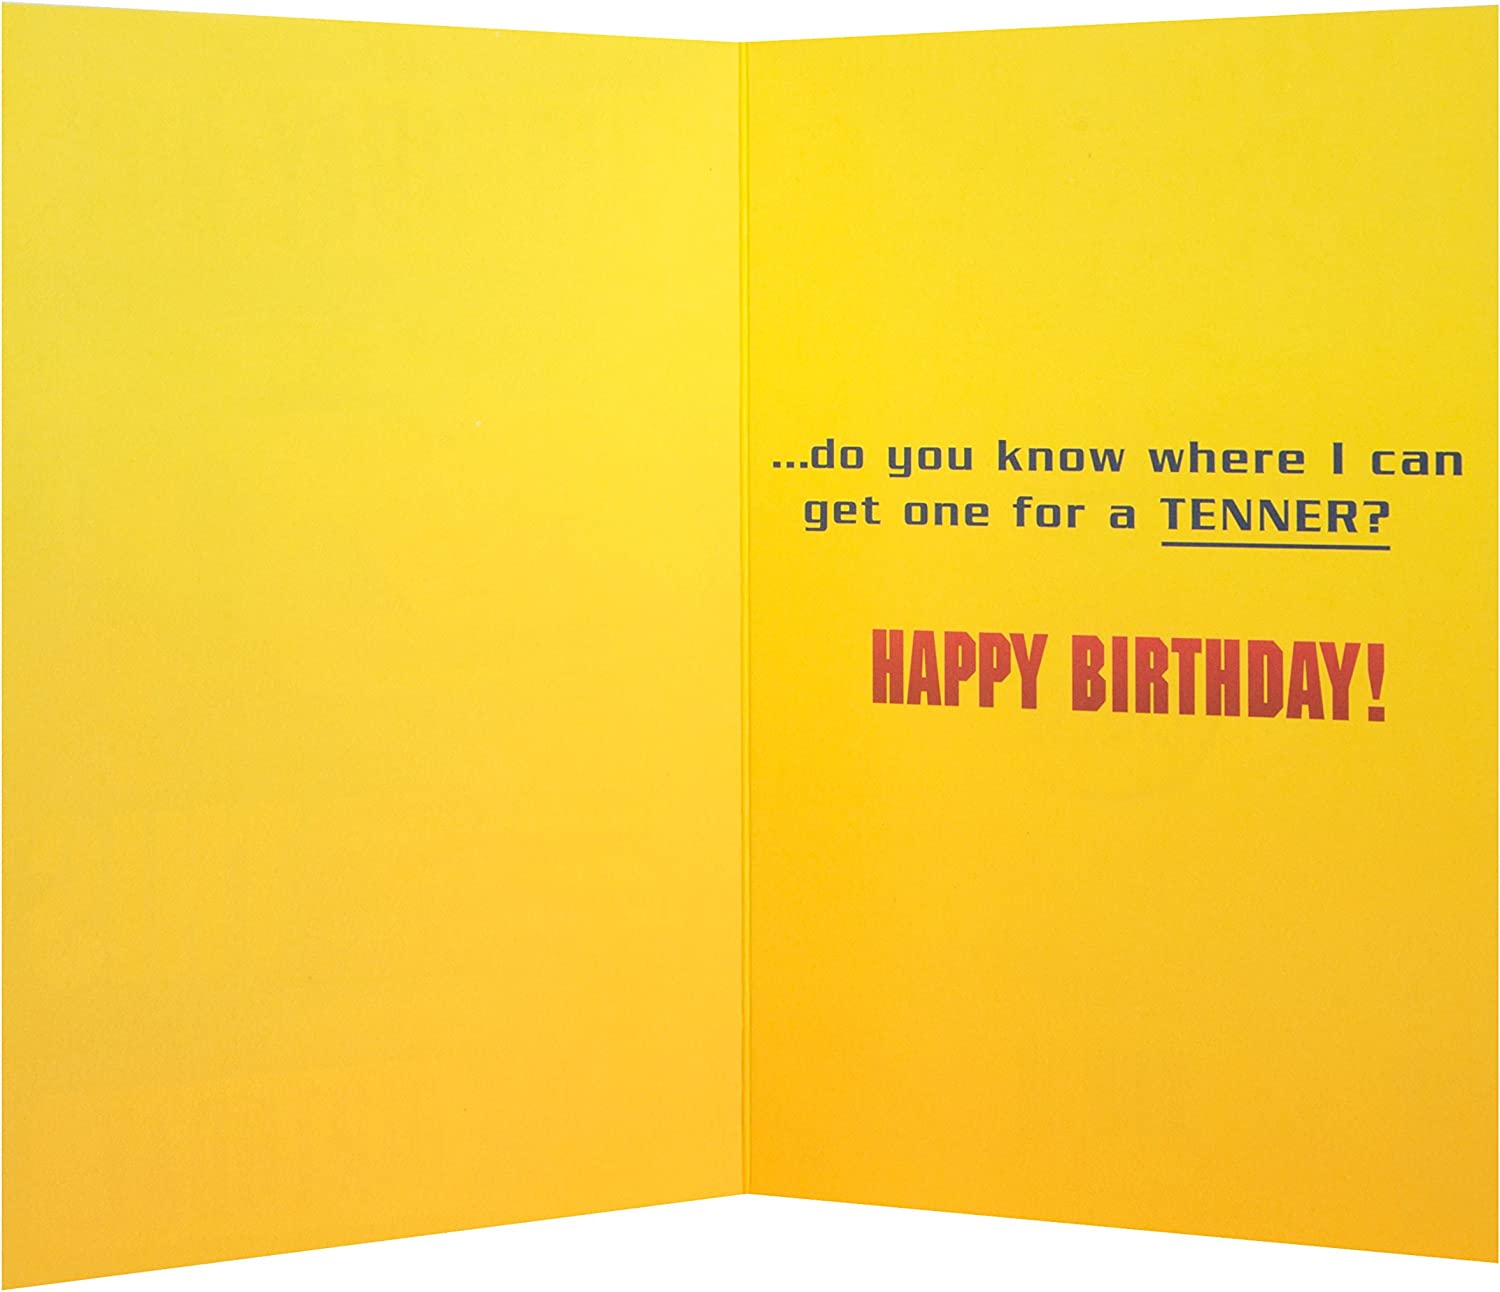 Humorous General Birthday Card - Supercar for a "Tenner"